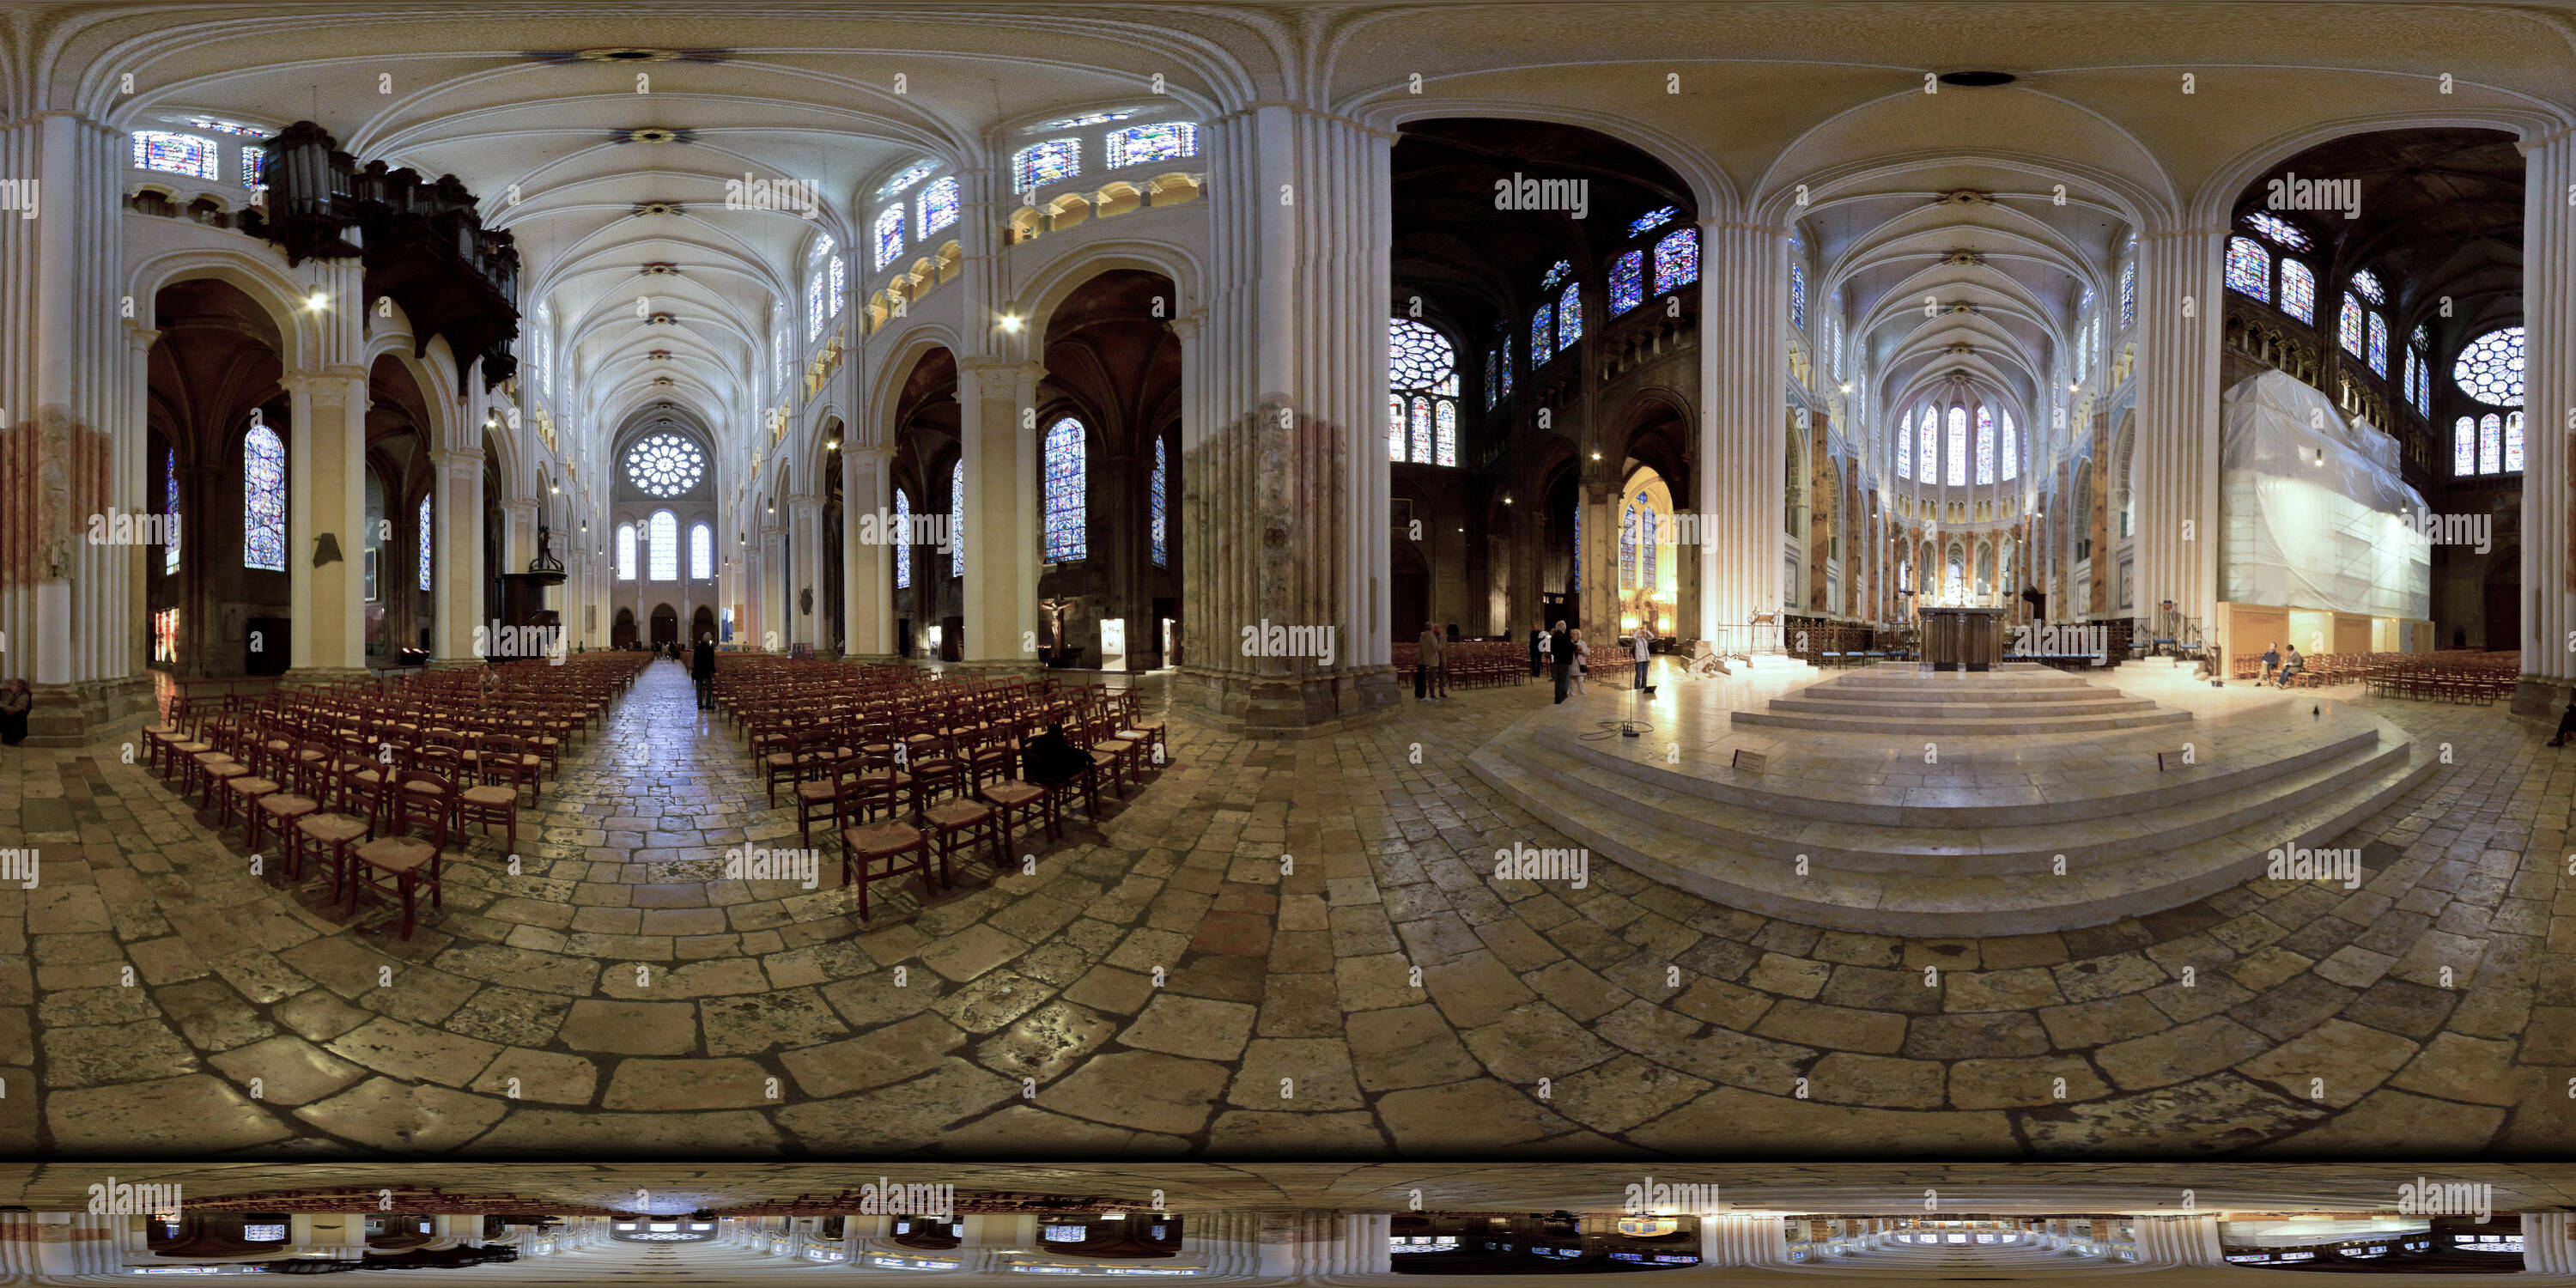 360 degree panoramic view of Cathedral of Our Lady of Chartres (I), 2016-10, freehand